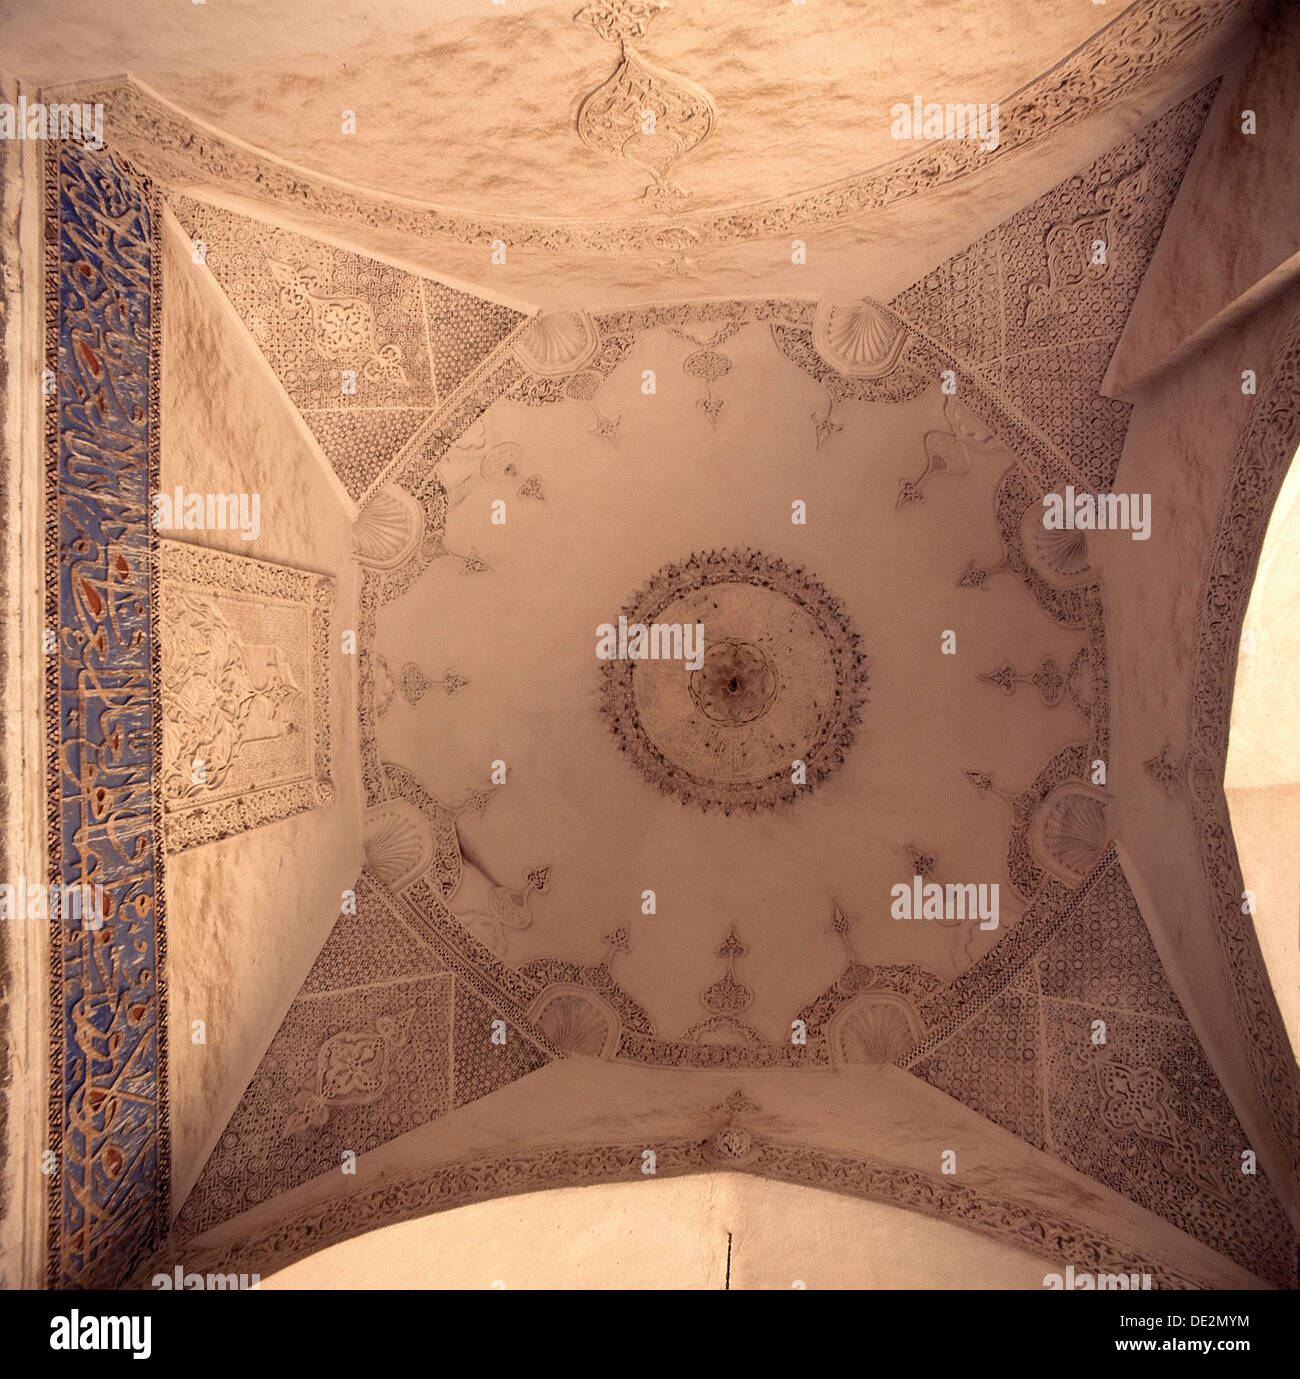 Plaster ceiling incised with geometric designs and freize of Arabic calligraphy. Stock Photo